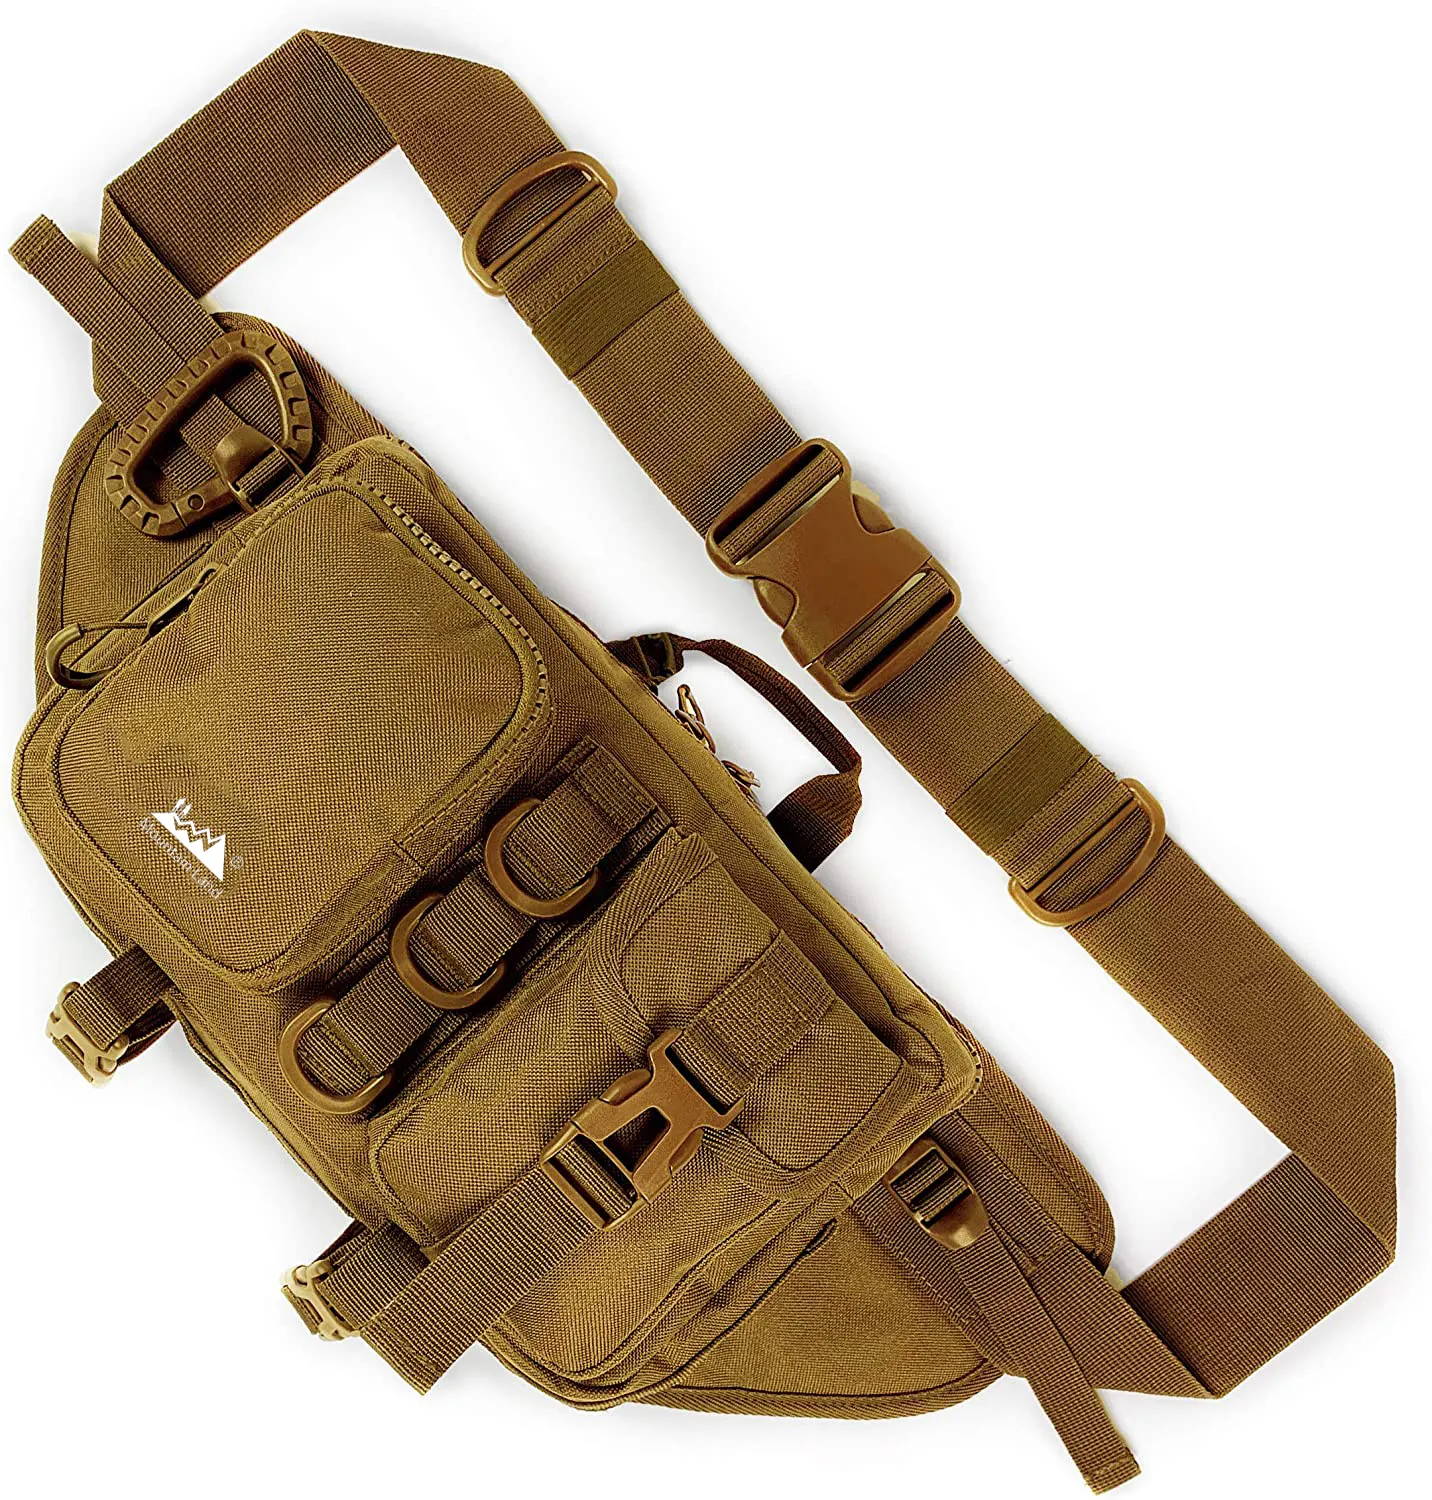 Tactical Sling Bag Fanny Waist Pack, Crossbody Shoulder or Chest Bag for Travel Cycling